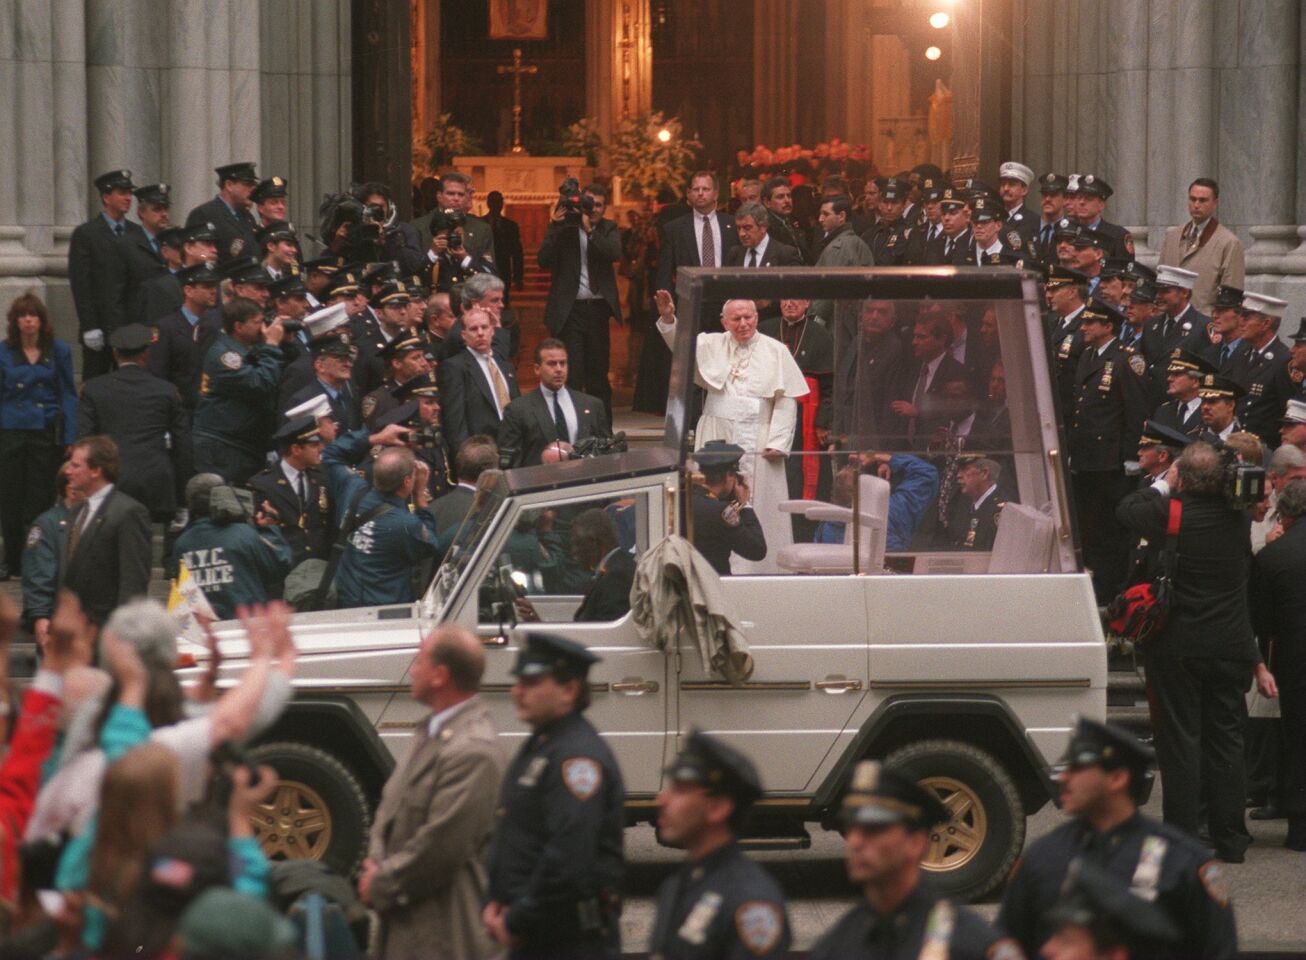 Pope John Paul II arrives at the steps of St. Patrick's Cathedral in New York City.